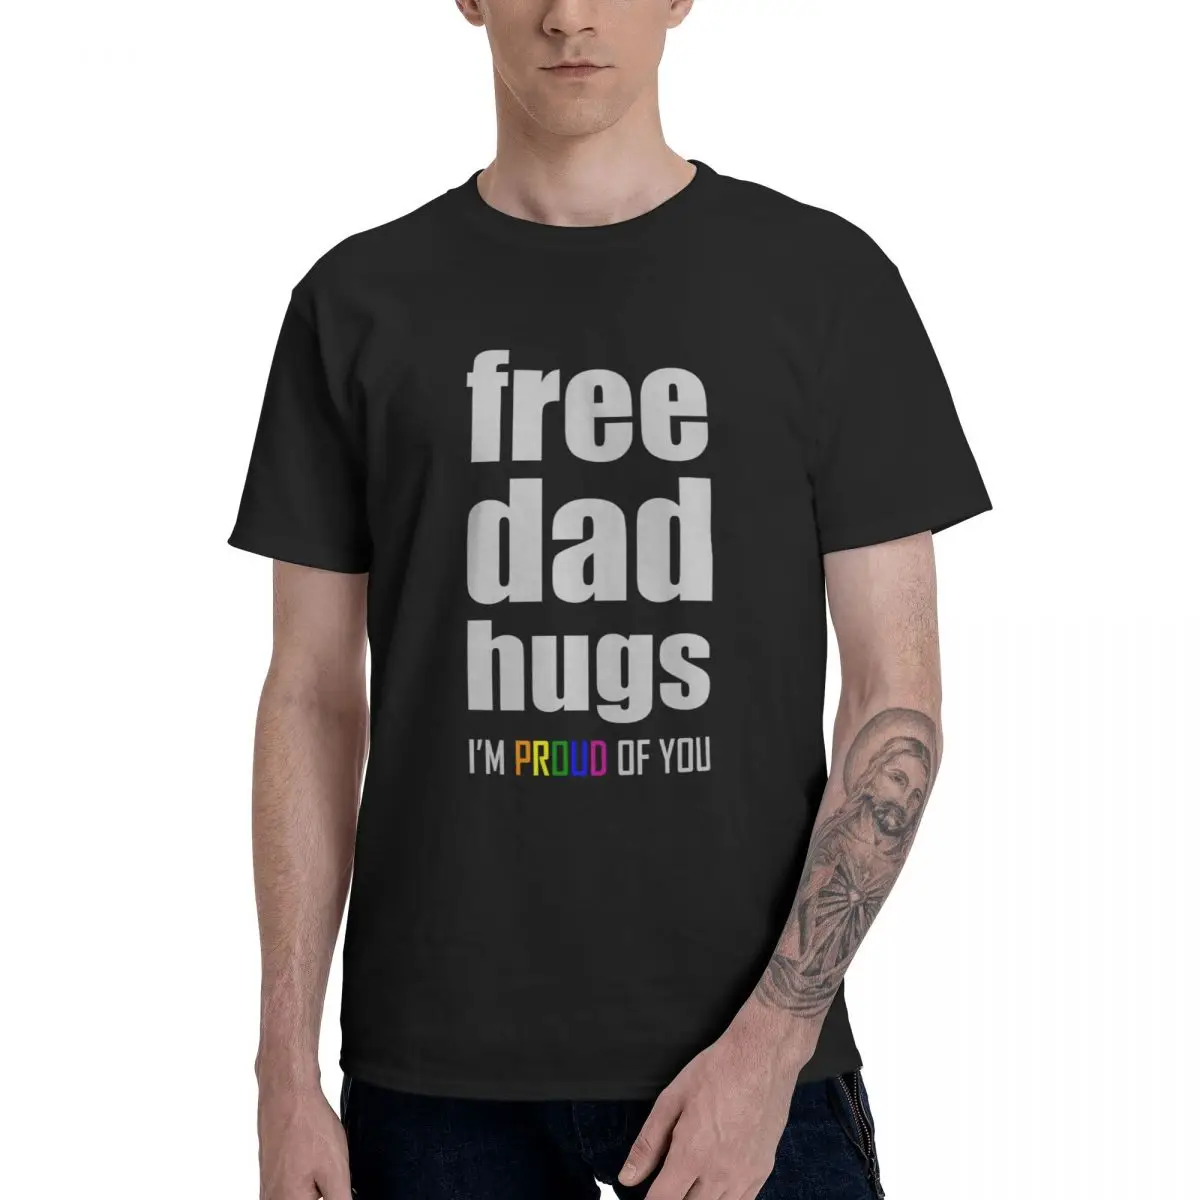 

FREE DAD HUGS LGBT Pride Month LGBTQ Rainbow Flag Graphic Tee Men's Basic Short Sleeve T-Shirt Aesthetic Clothes Funny Tops